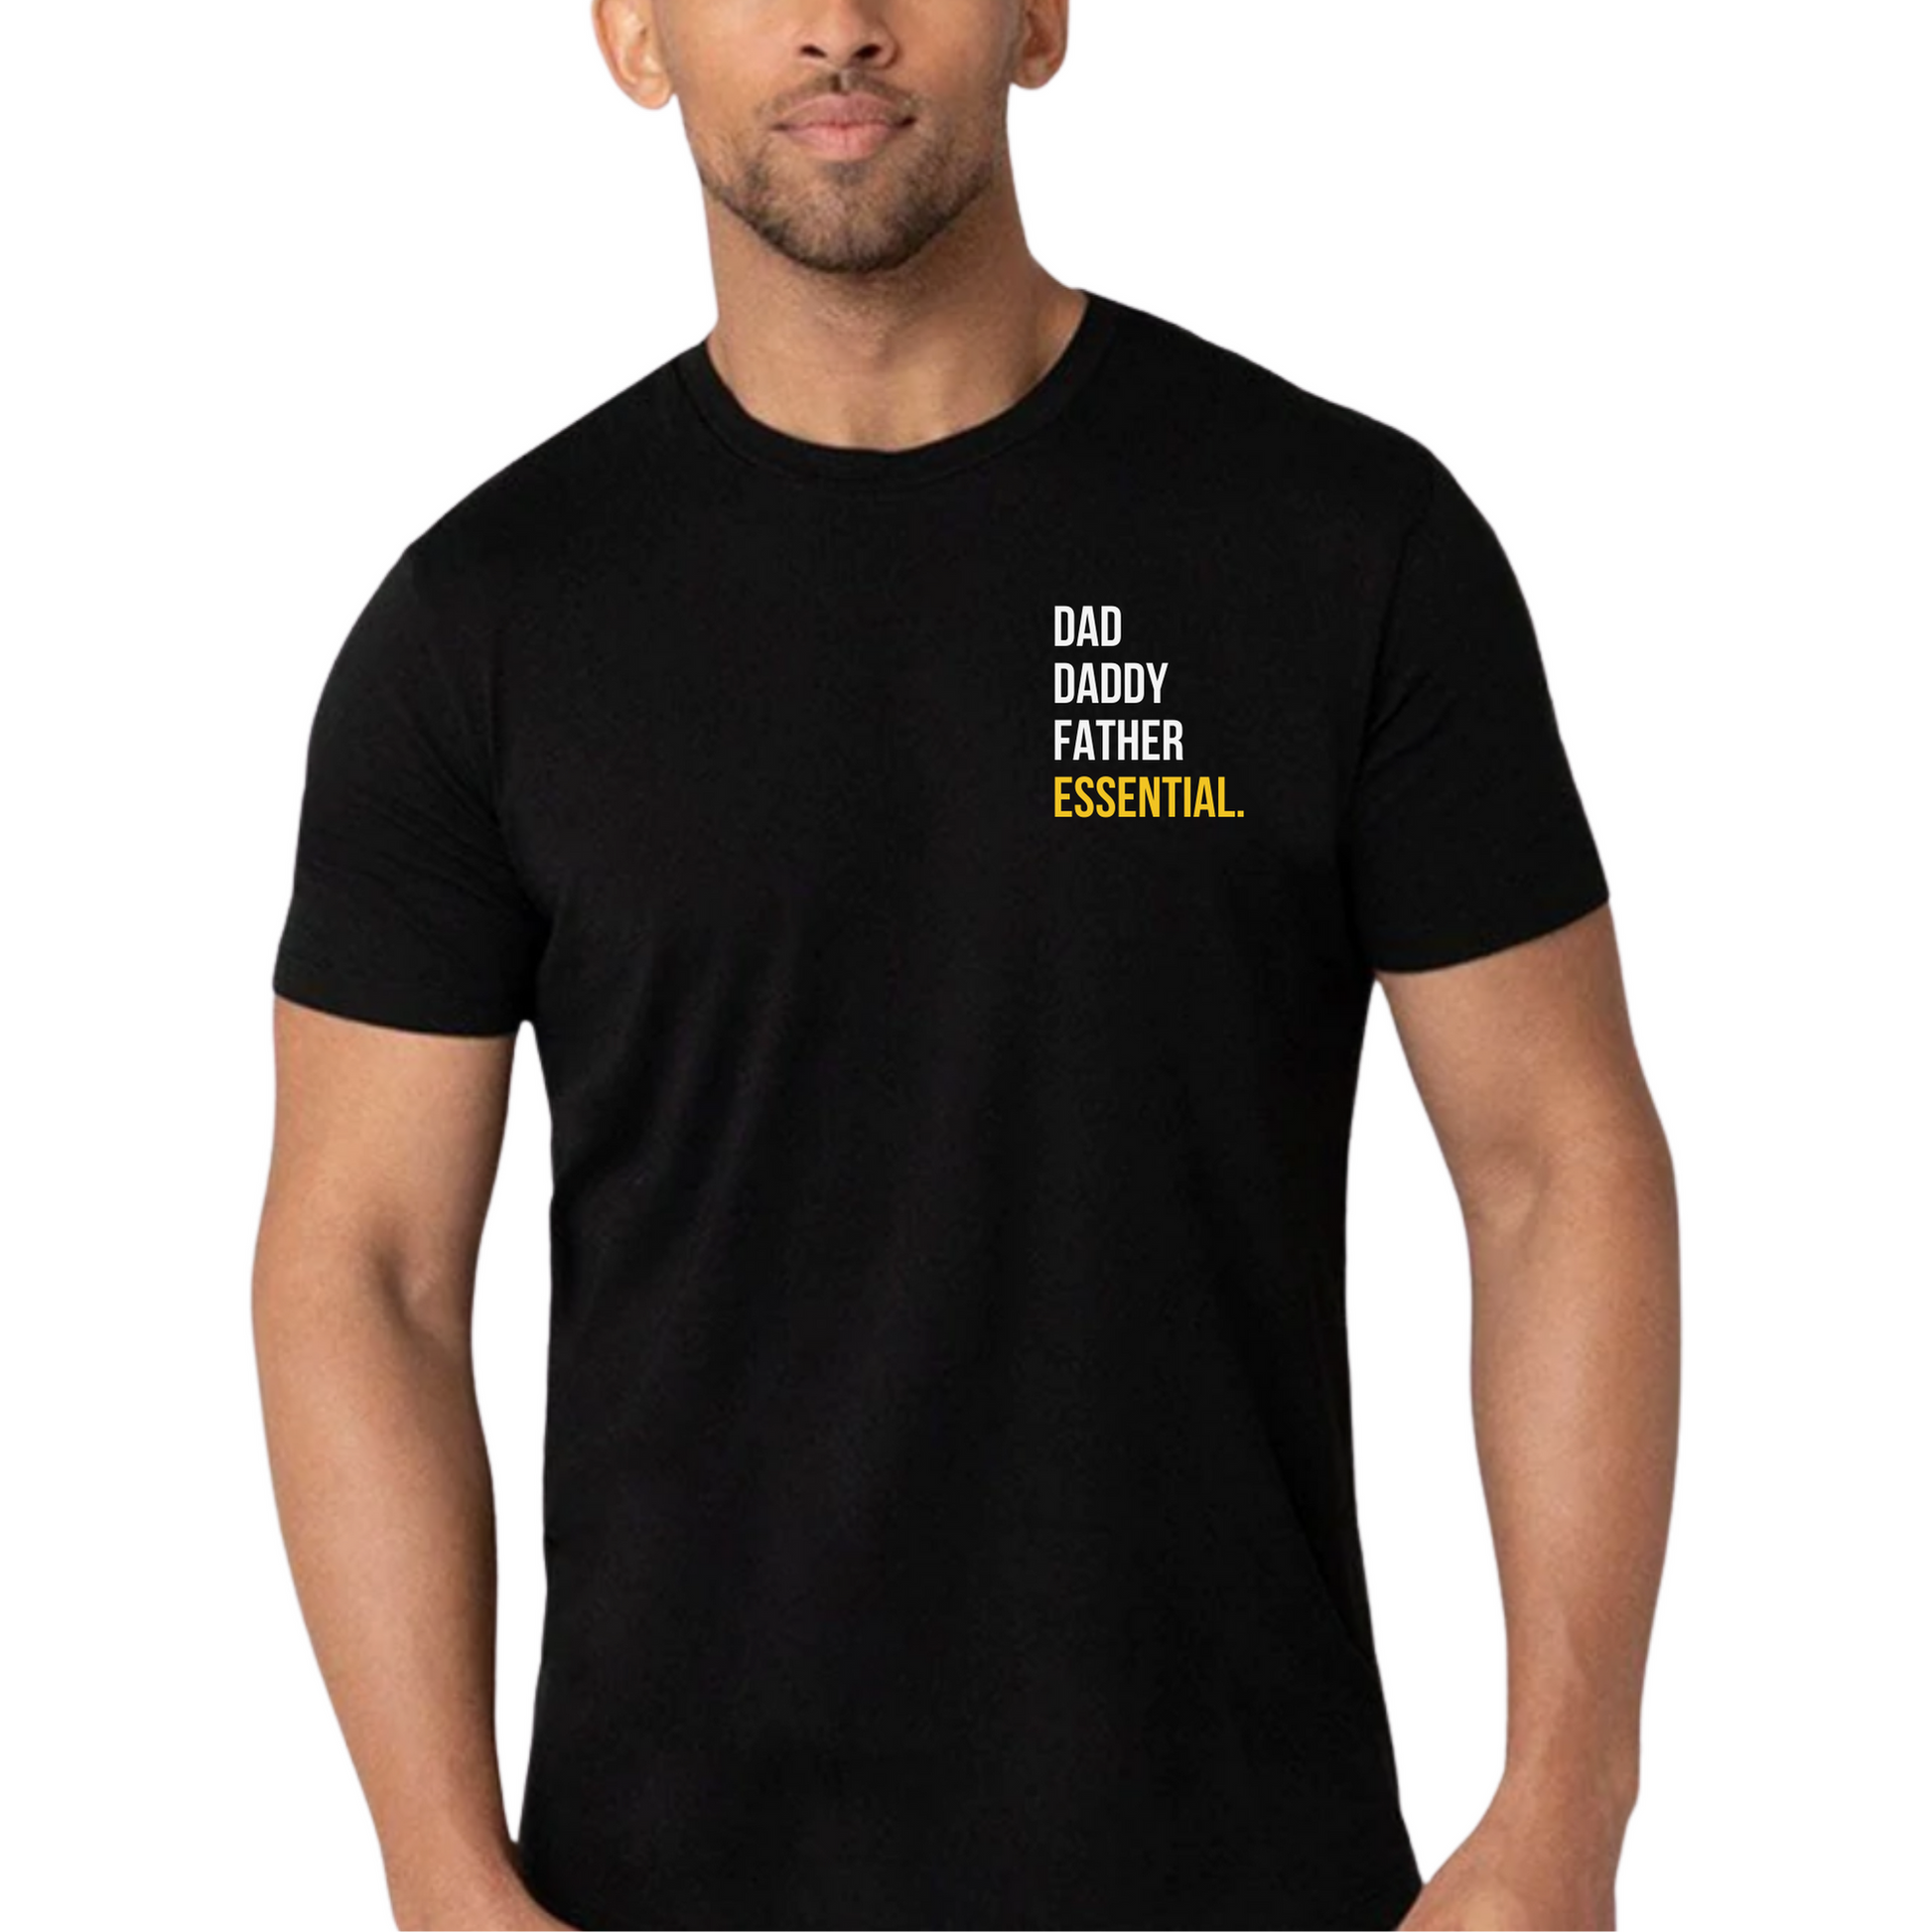 Essential Dad tee from Sol Rise Essentials - fathers day tshirt for great dads